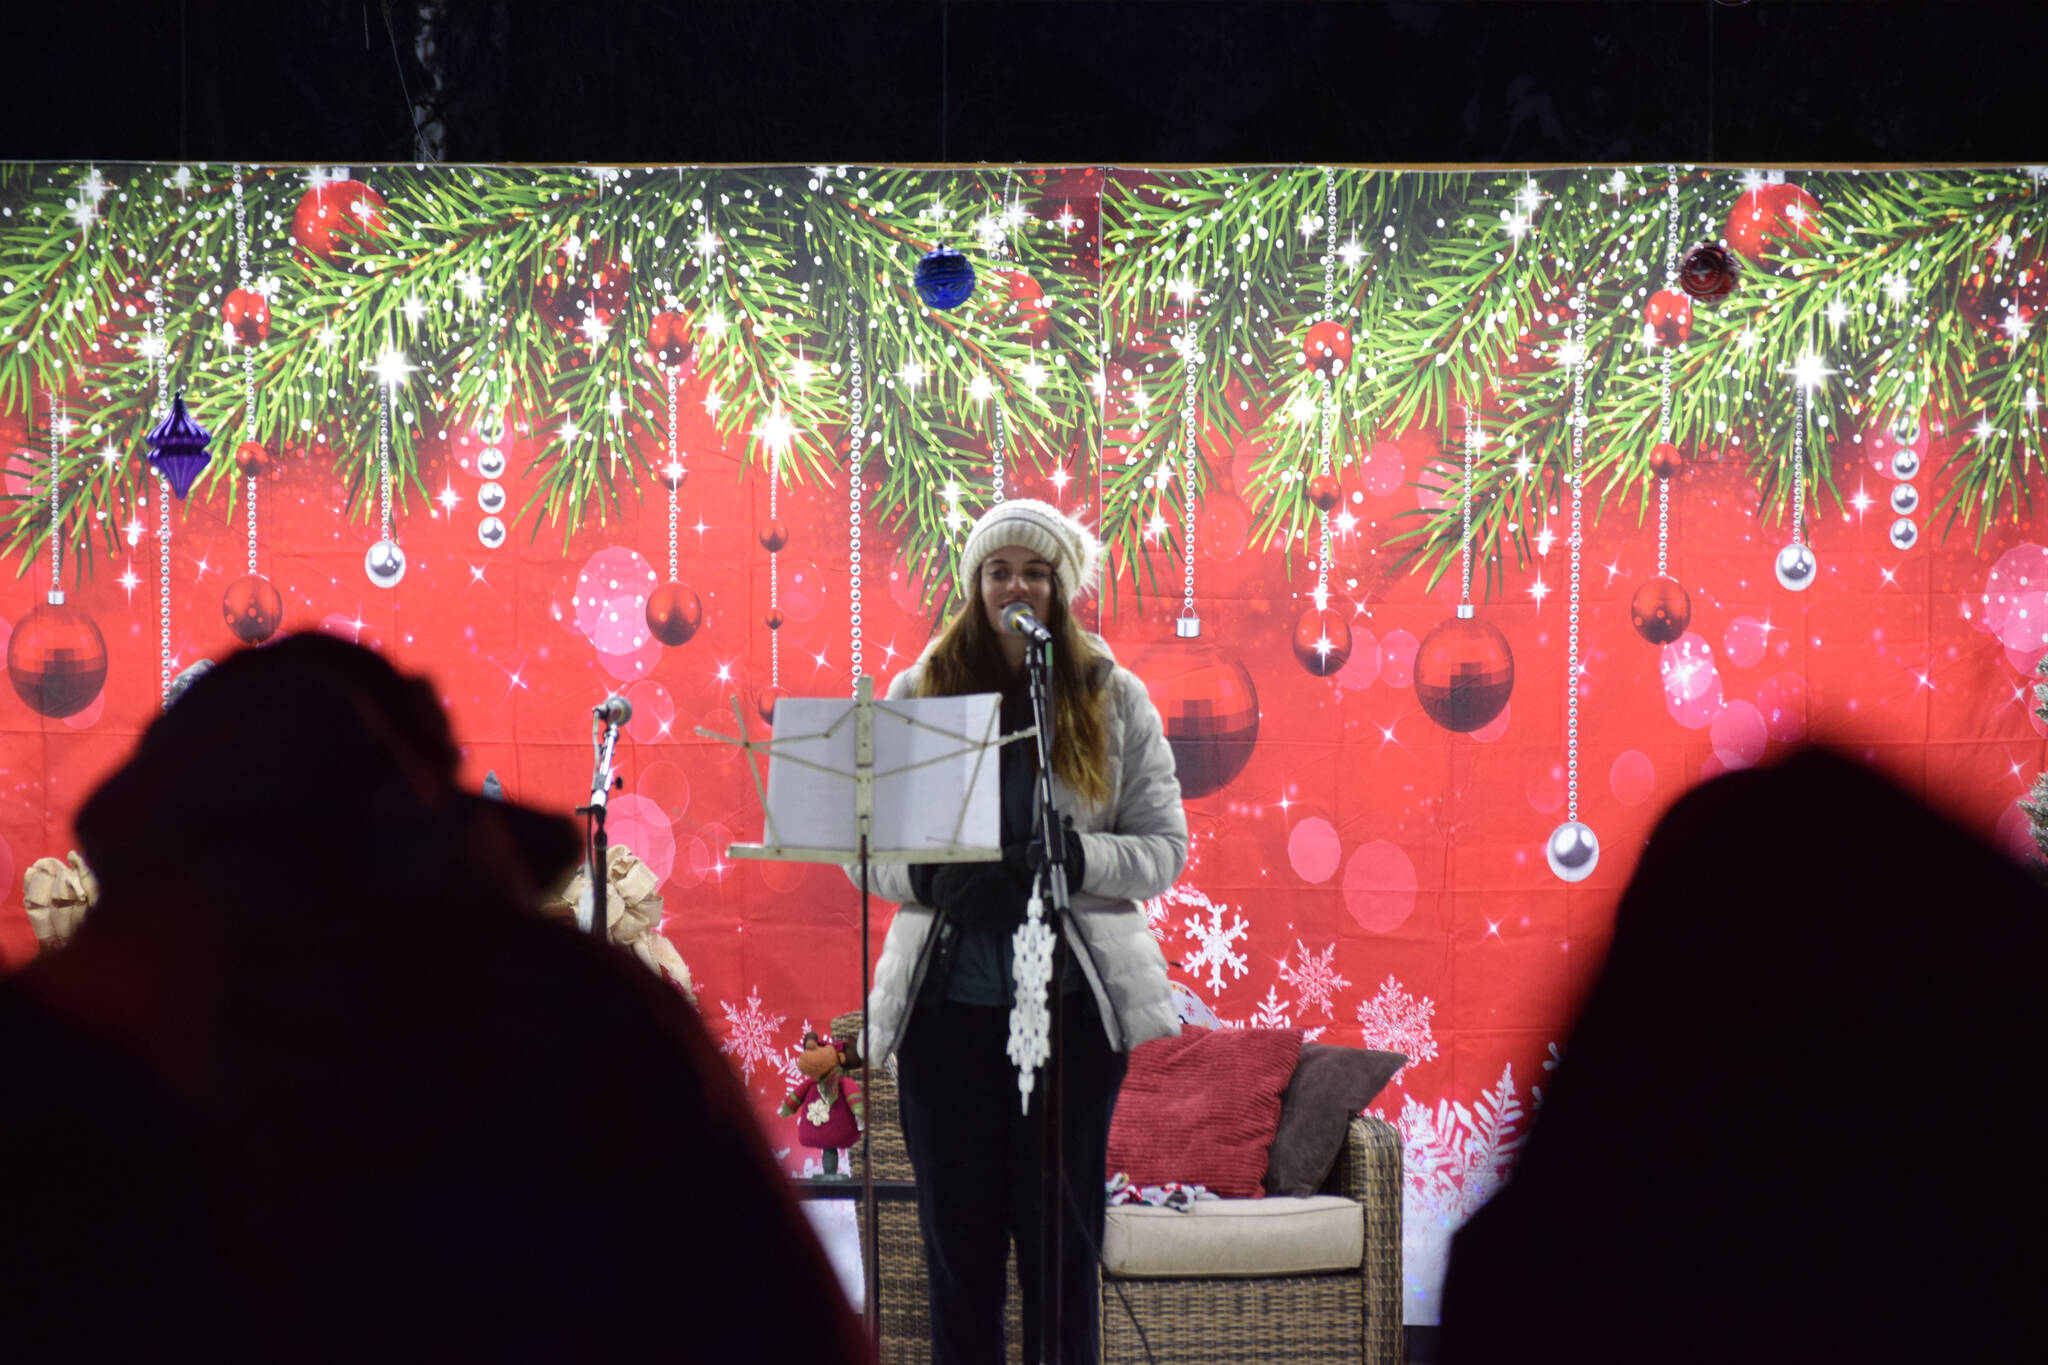 A member of the Soldotna High School swing choir sings carols for the crowd at Soldotna Creek Park on Saturday, Dec. 4, 2021. (Camille Botello/Peninsula Clarion)